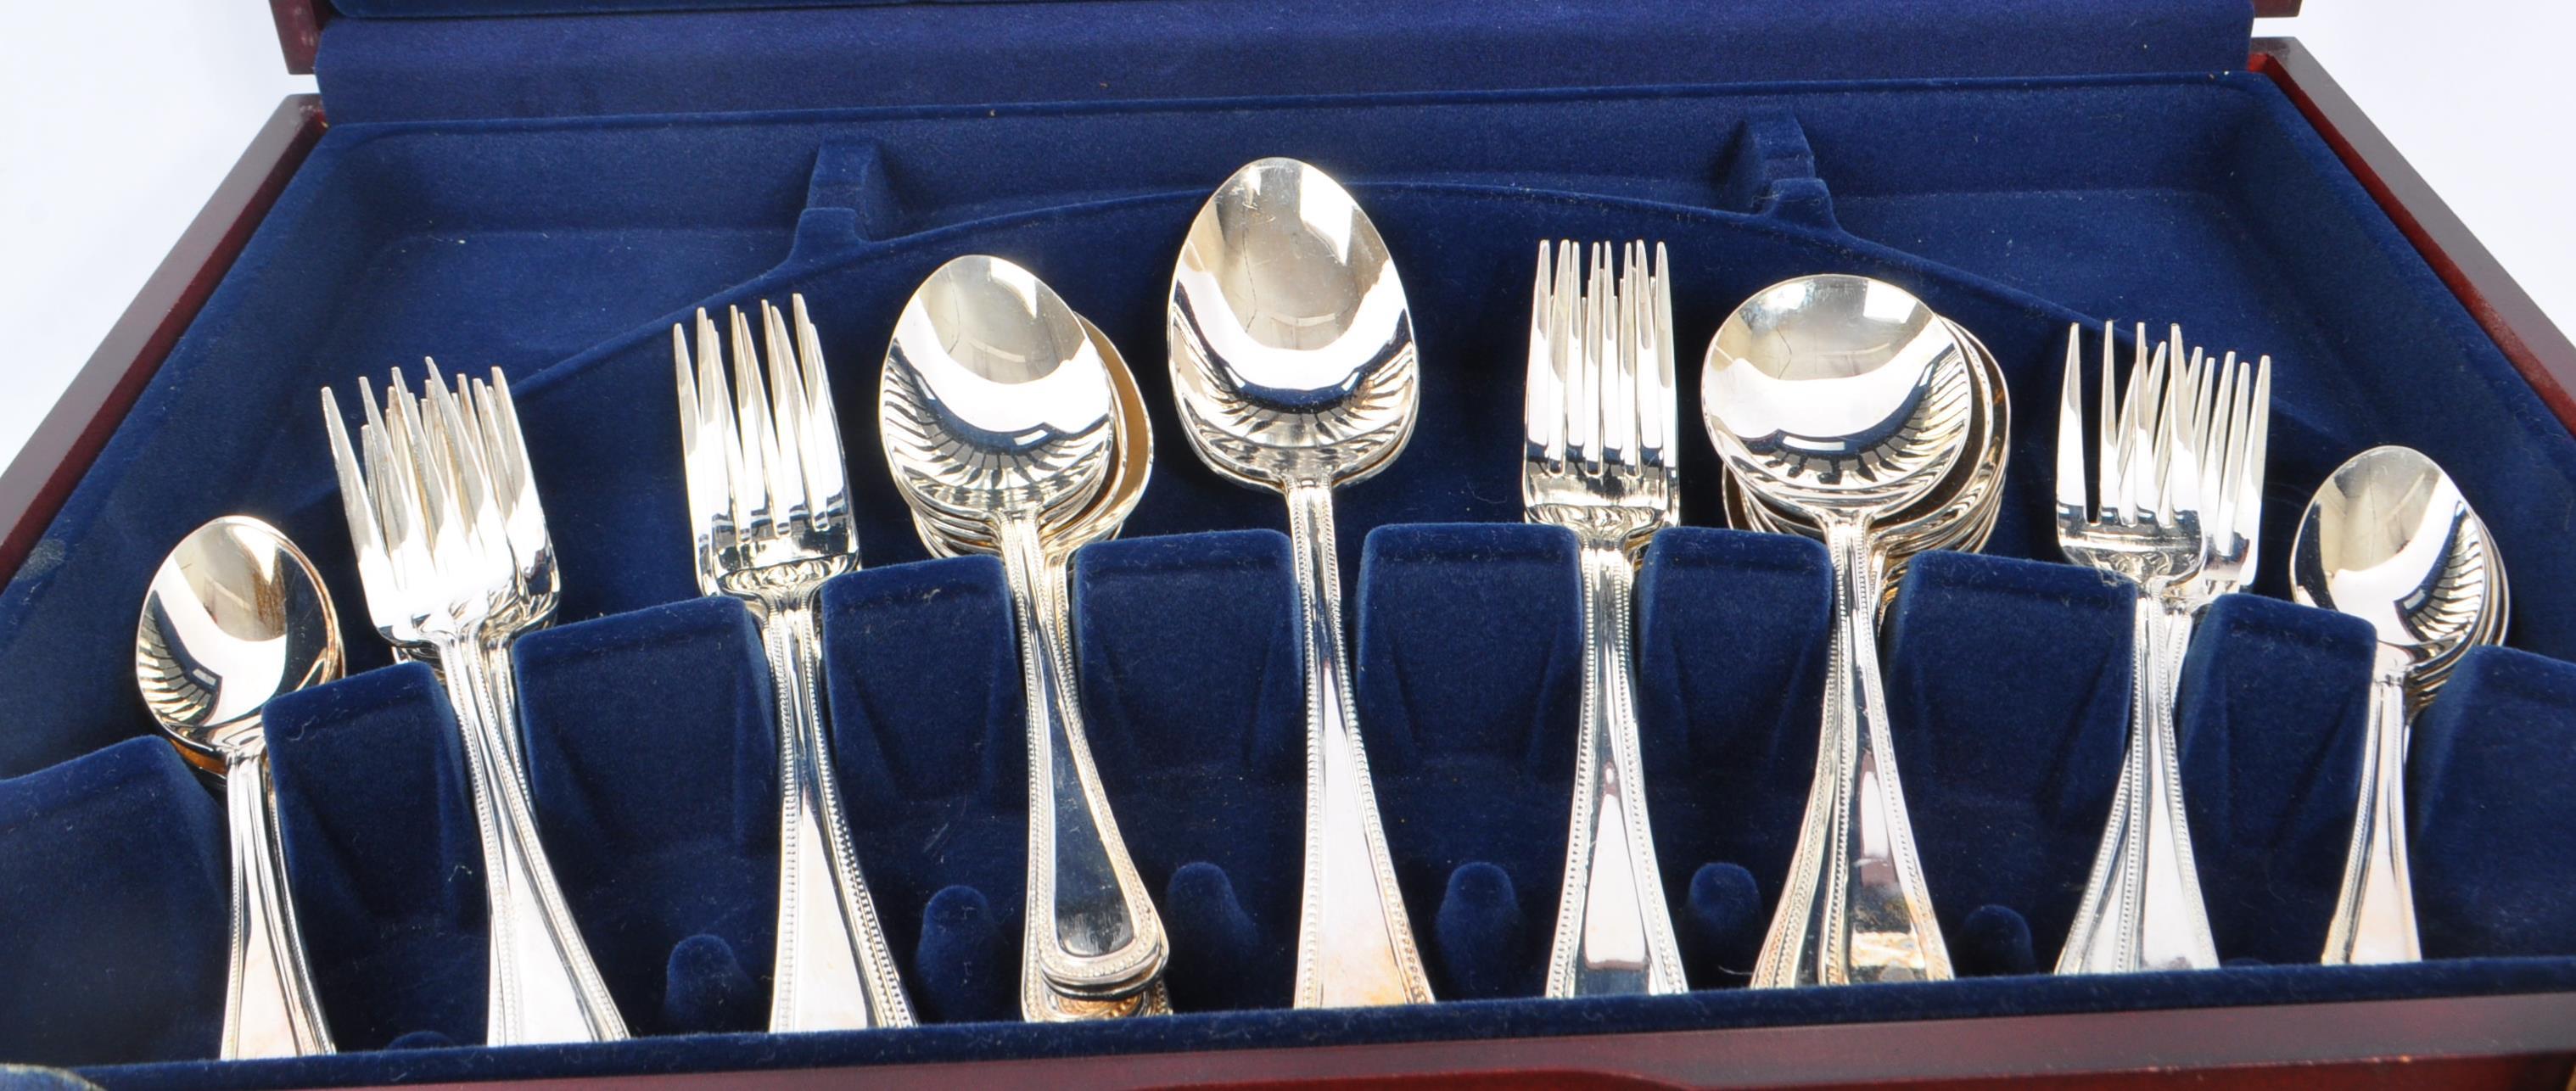 VINERS - BEAD PATTERN SILVER PLATE CUTLERY CANTEEN - Image 8 of 11